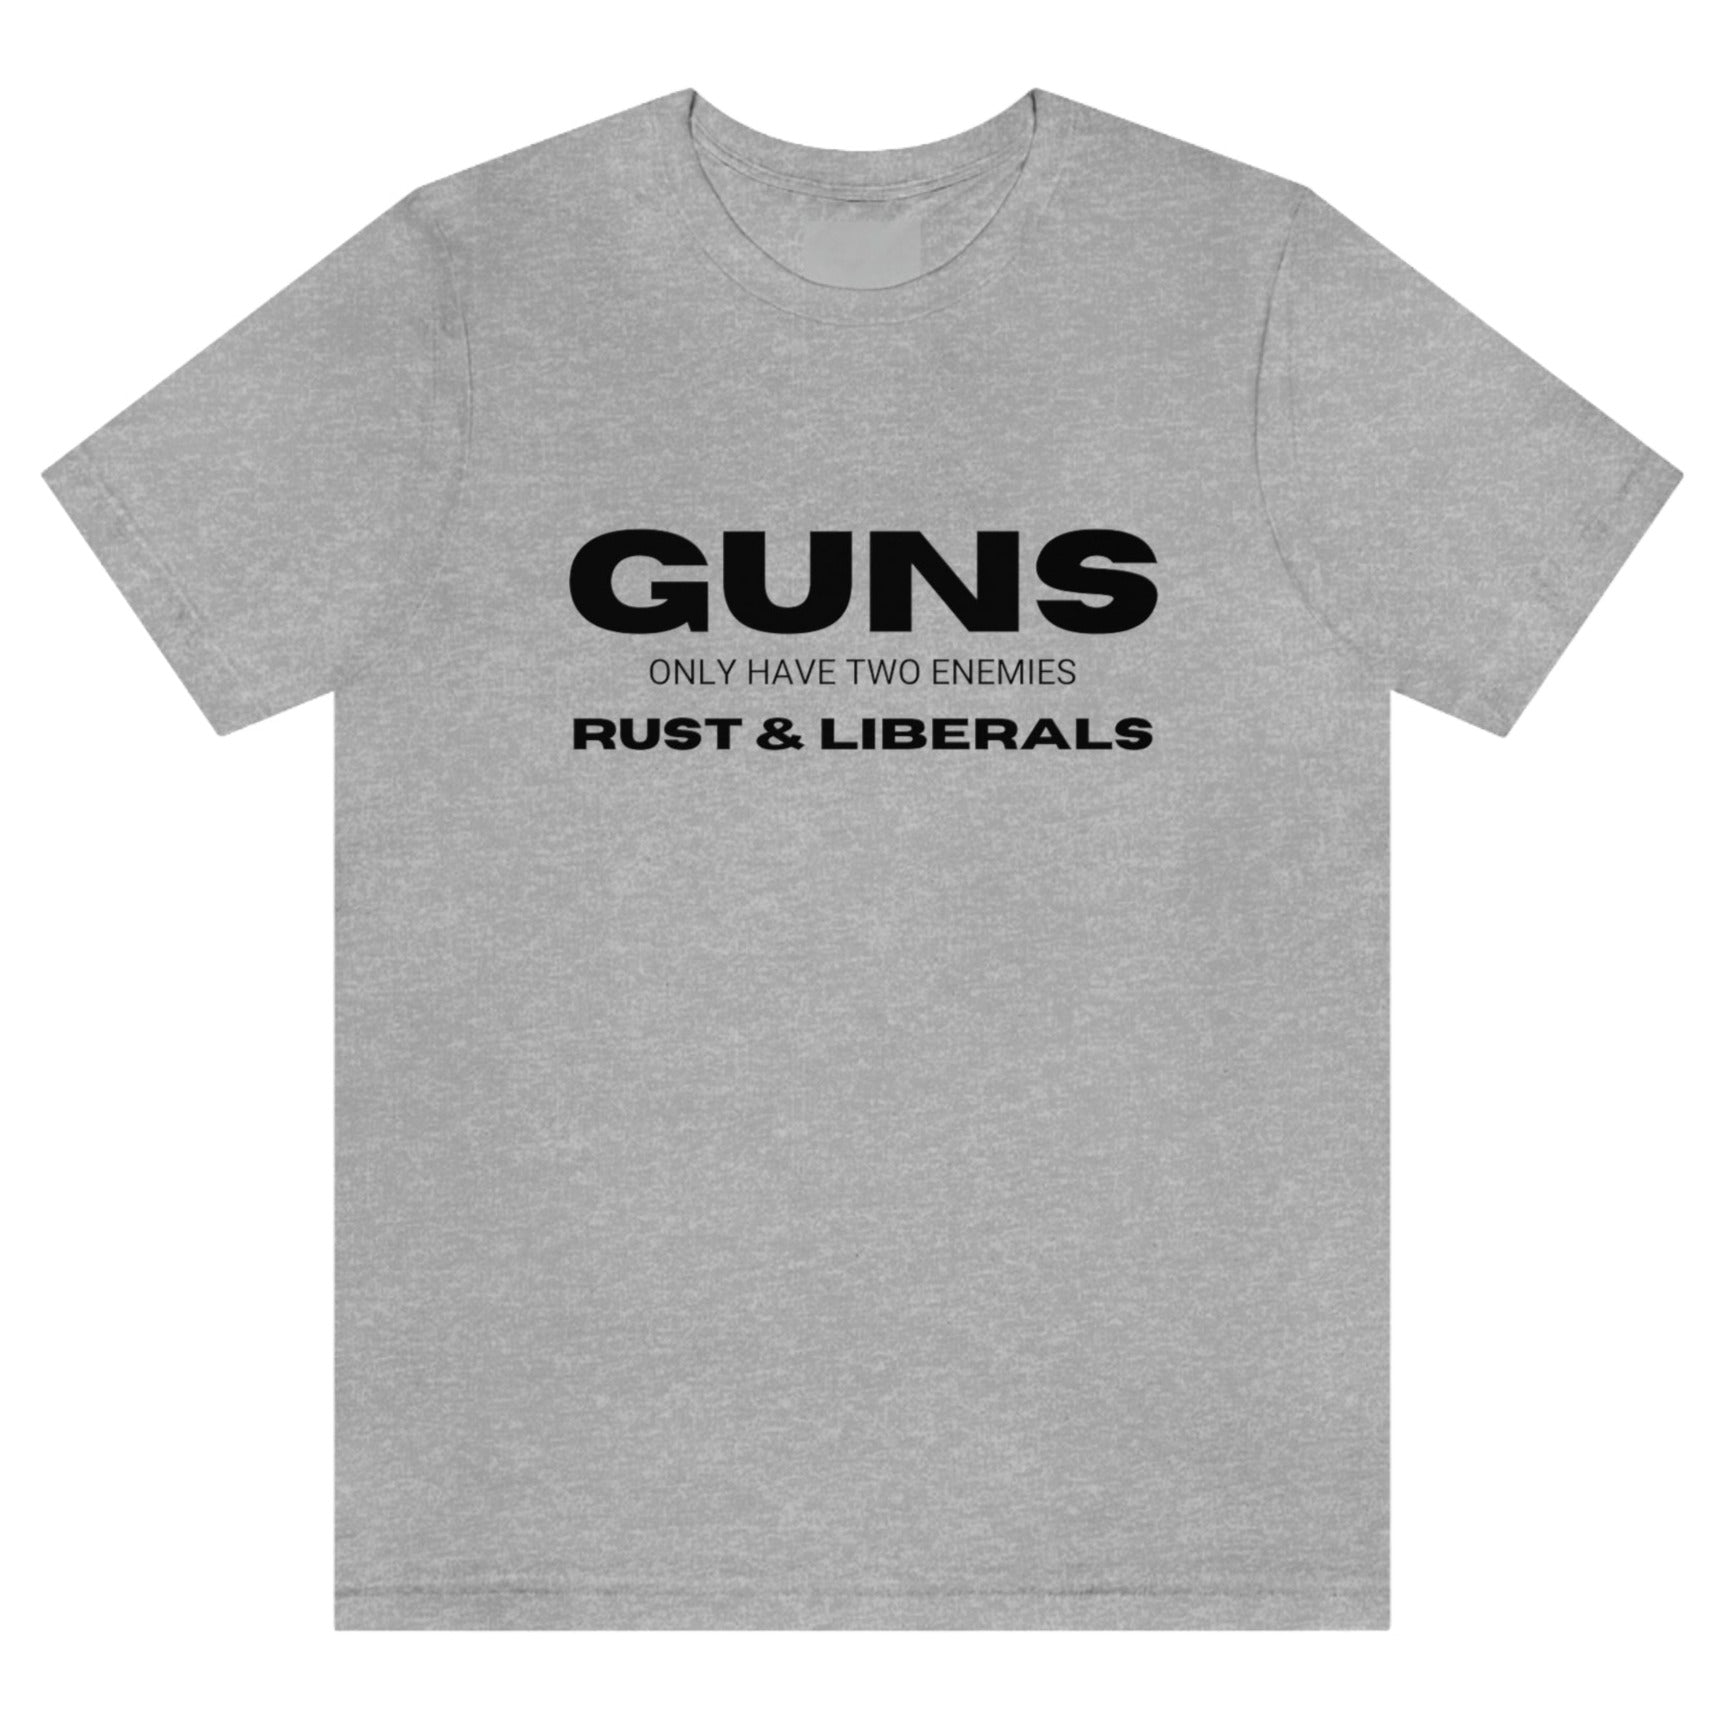 guns-only-have-two-enemies-rust-and-liberals-athletic-heather-t-shirt-2a-second-amendment